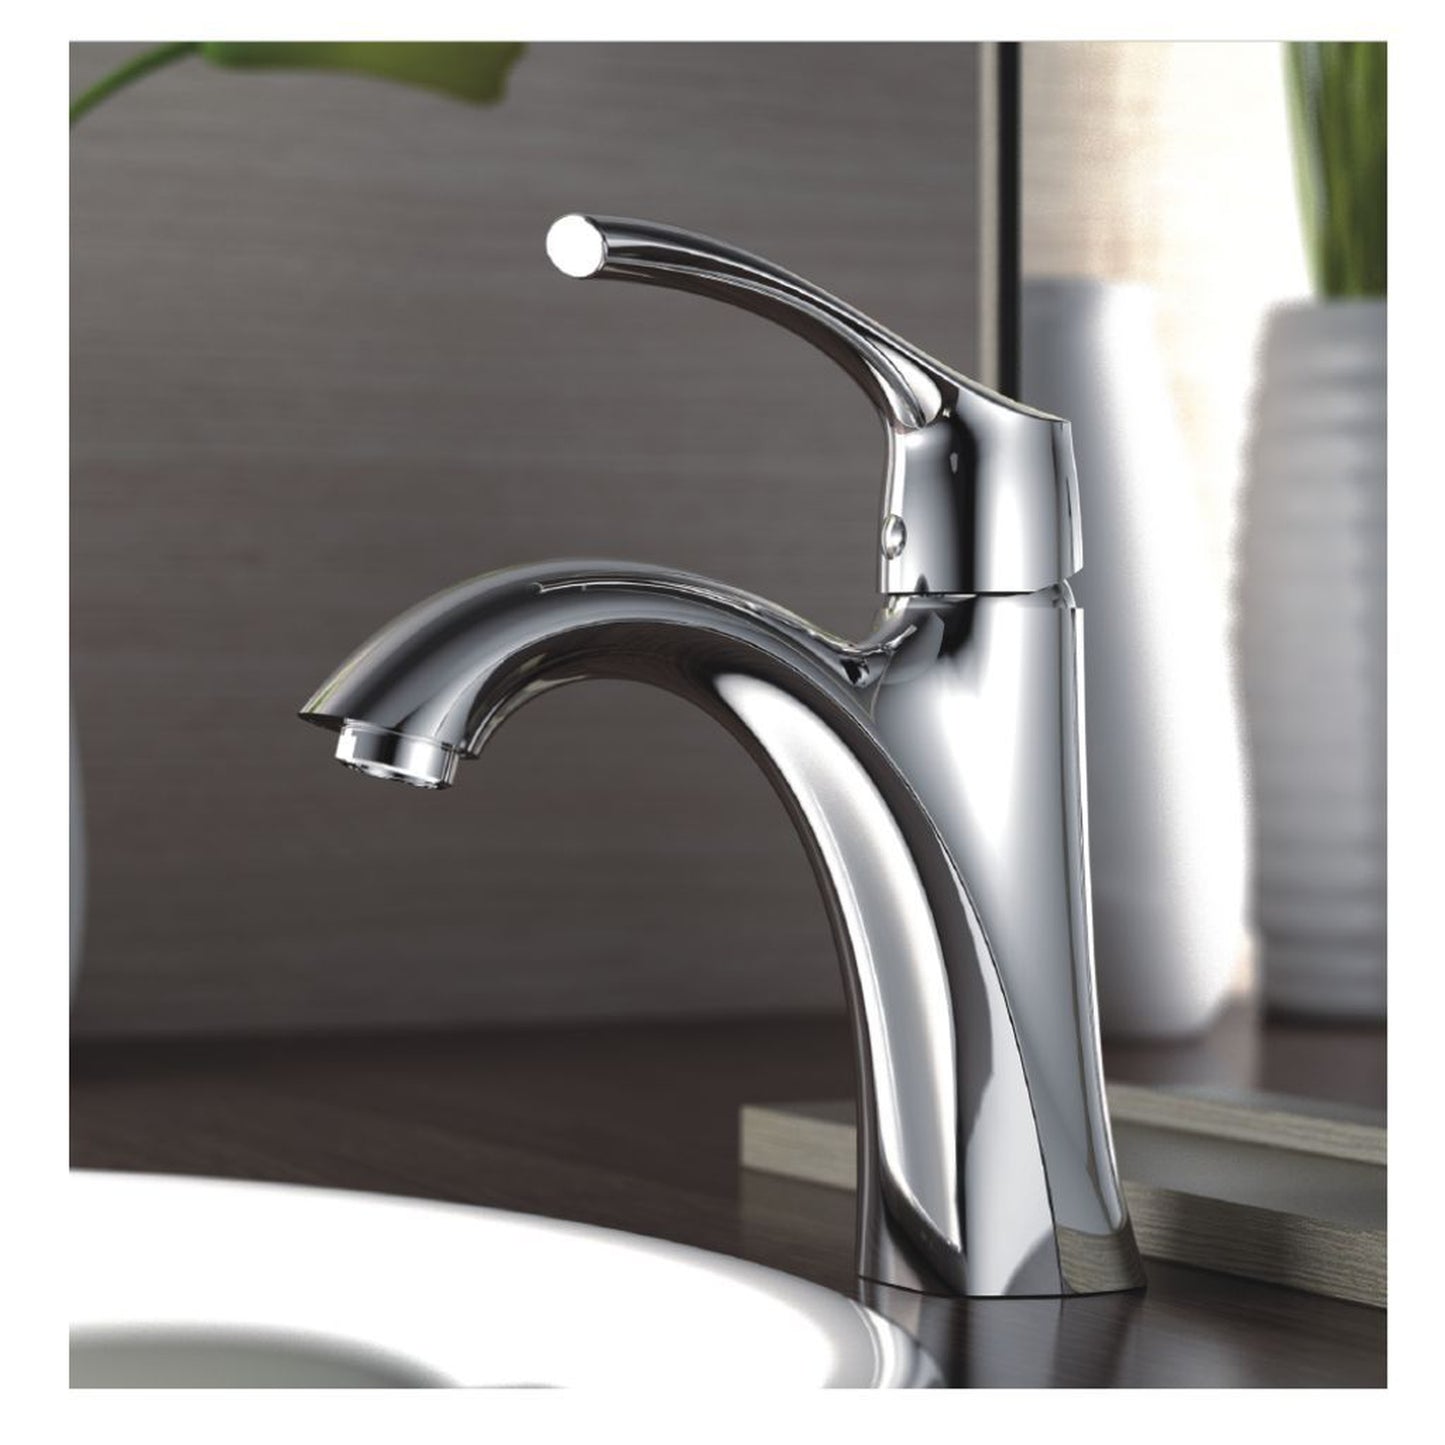 Allora USA Tulip Single Handle Chrome Bathroom Faucet With Drain Assembly